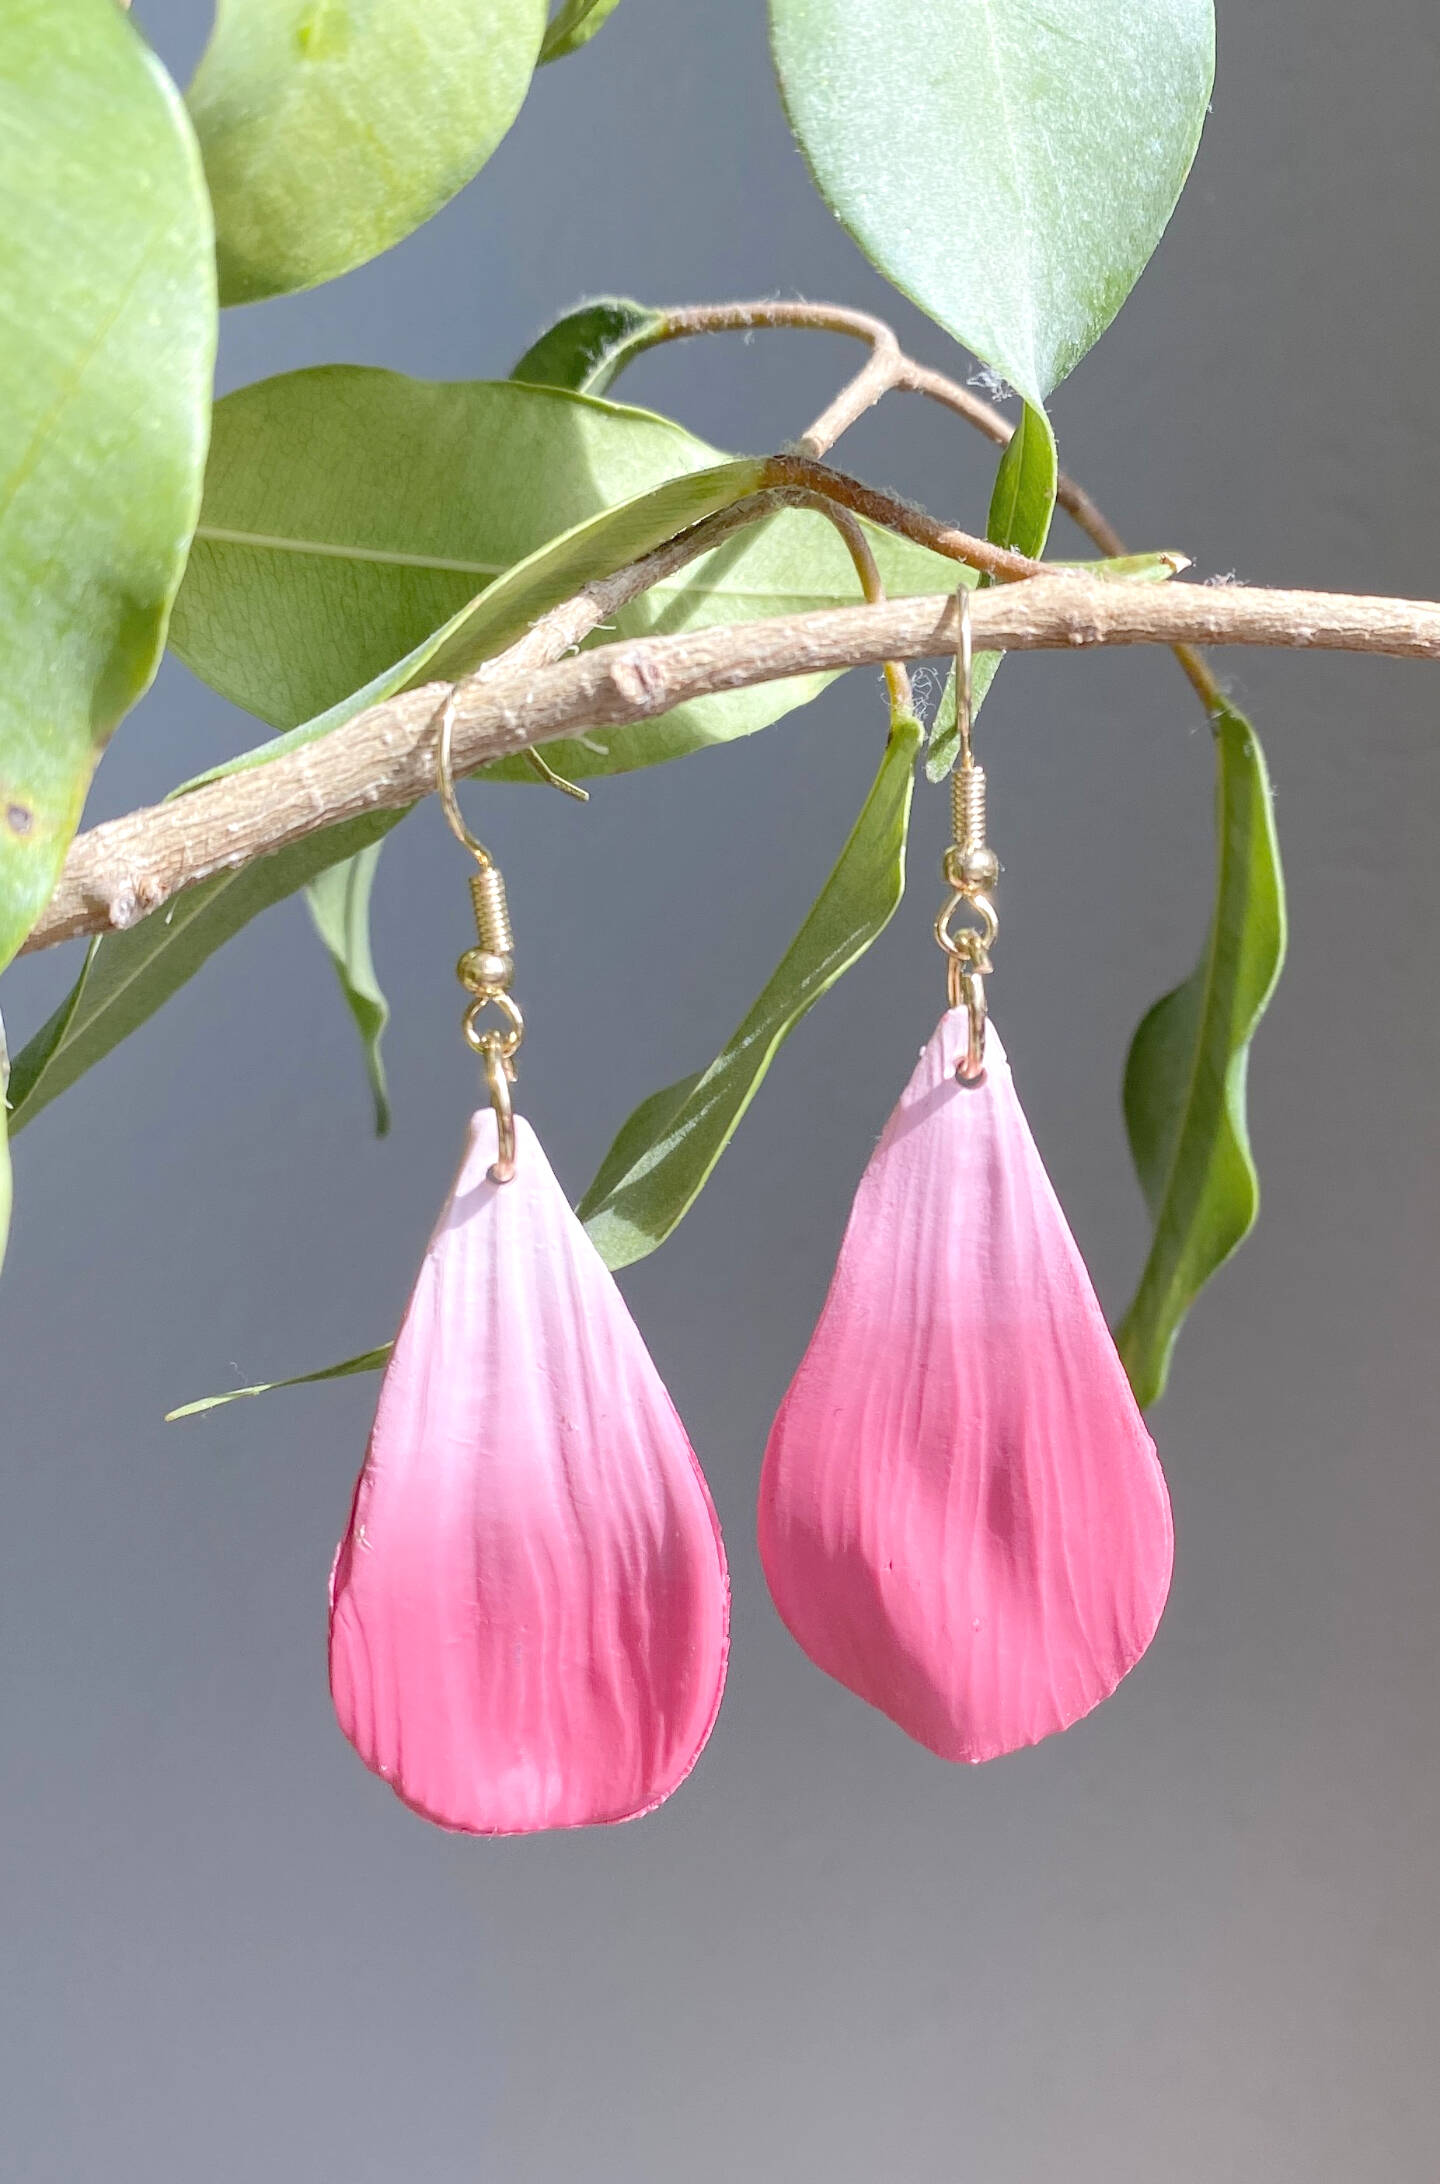 “Petals”, earrings by Tracy and Emma Early, is on display through May at the Art Shop Gallery in Homer, Alaska. Photo provided by Art Shop Gallery